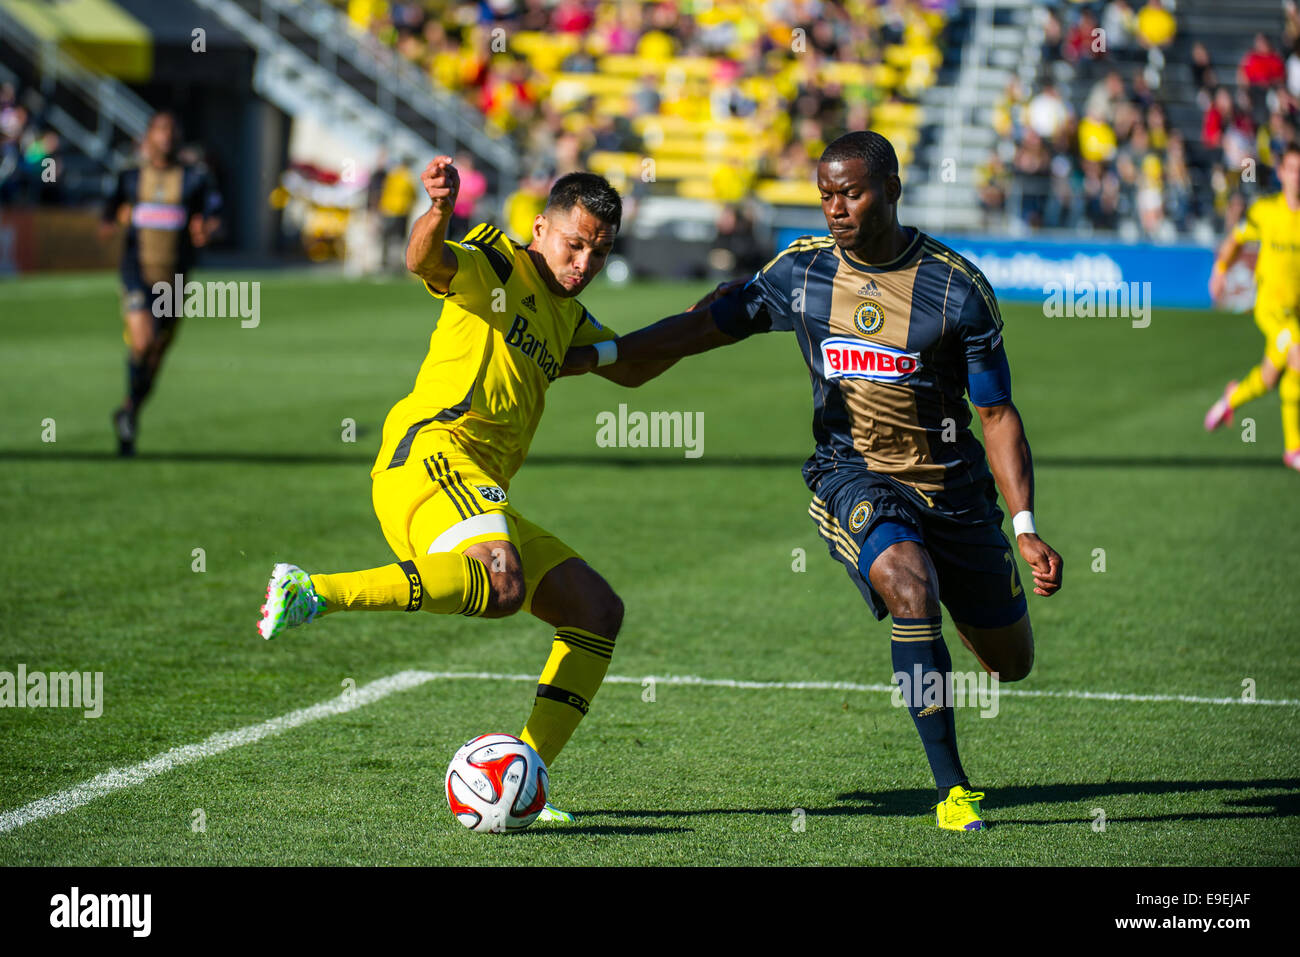 Colombus, OH, USA. 26th Oct, 2014. Columbus Crew forward Jairo Arrieta (19) trying to pass the ball past Philadelphia Union defender Carlos Valdes (2) in first half of the the MLS soccer match between Philadelphia Union and Columbus Crew at Columbus Crew Stadium, in Columbus OH. October 26, 2014 Credit:  Cal Sport Media/Alamy Live News Stock Photo